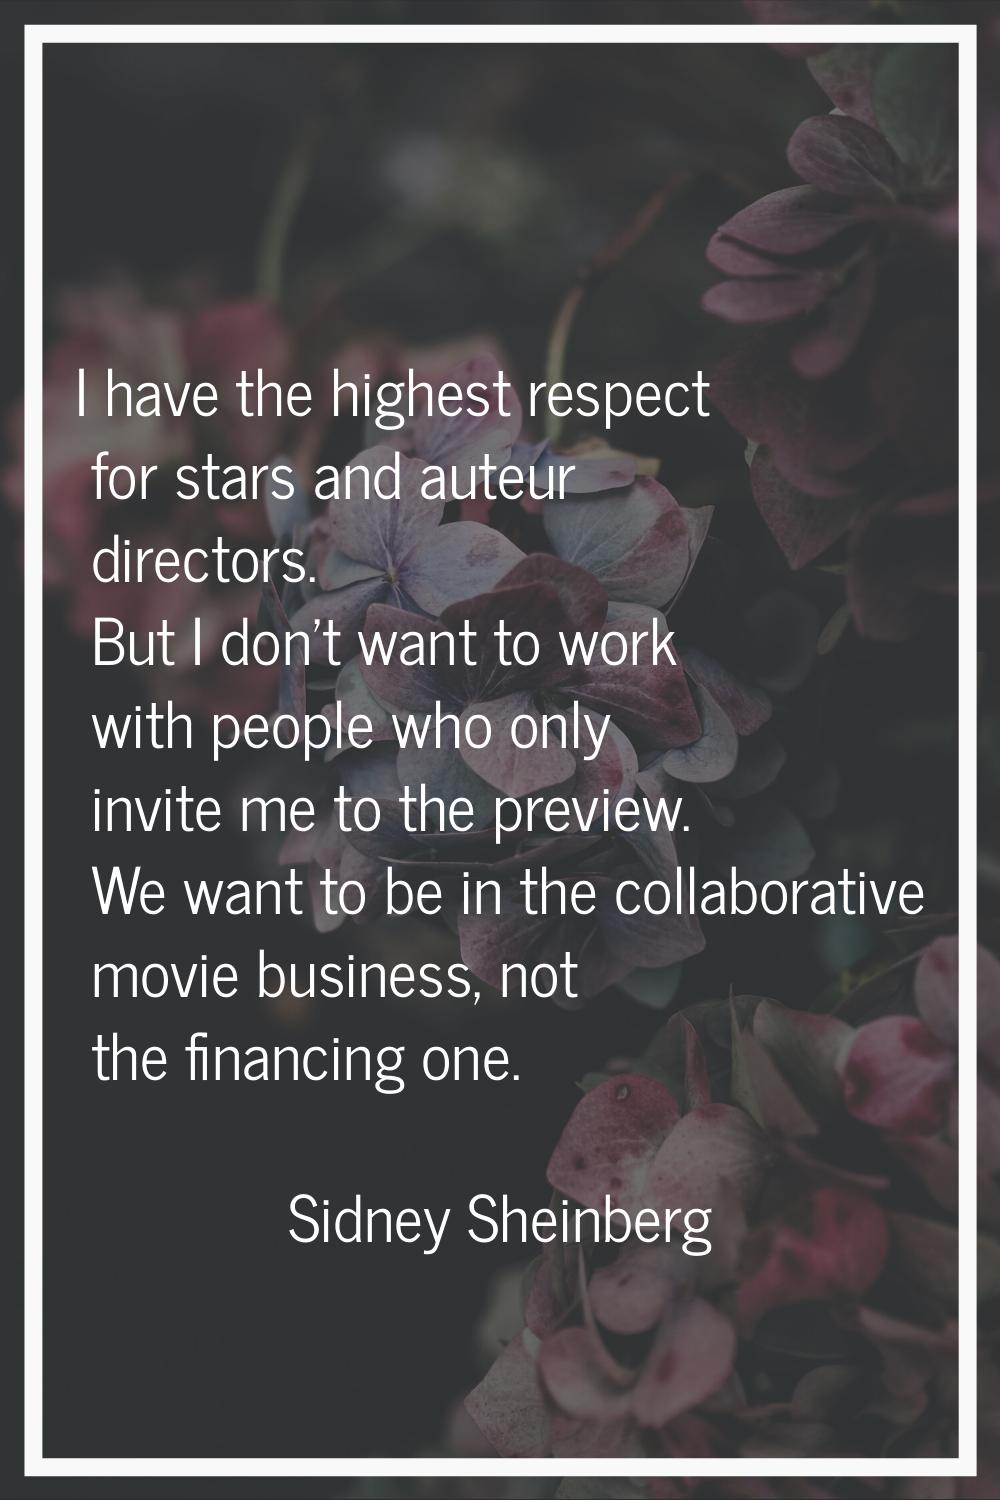 I have the highest respect for stars and auteur directors. But I don't want to work with people who